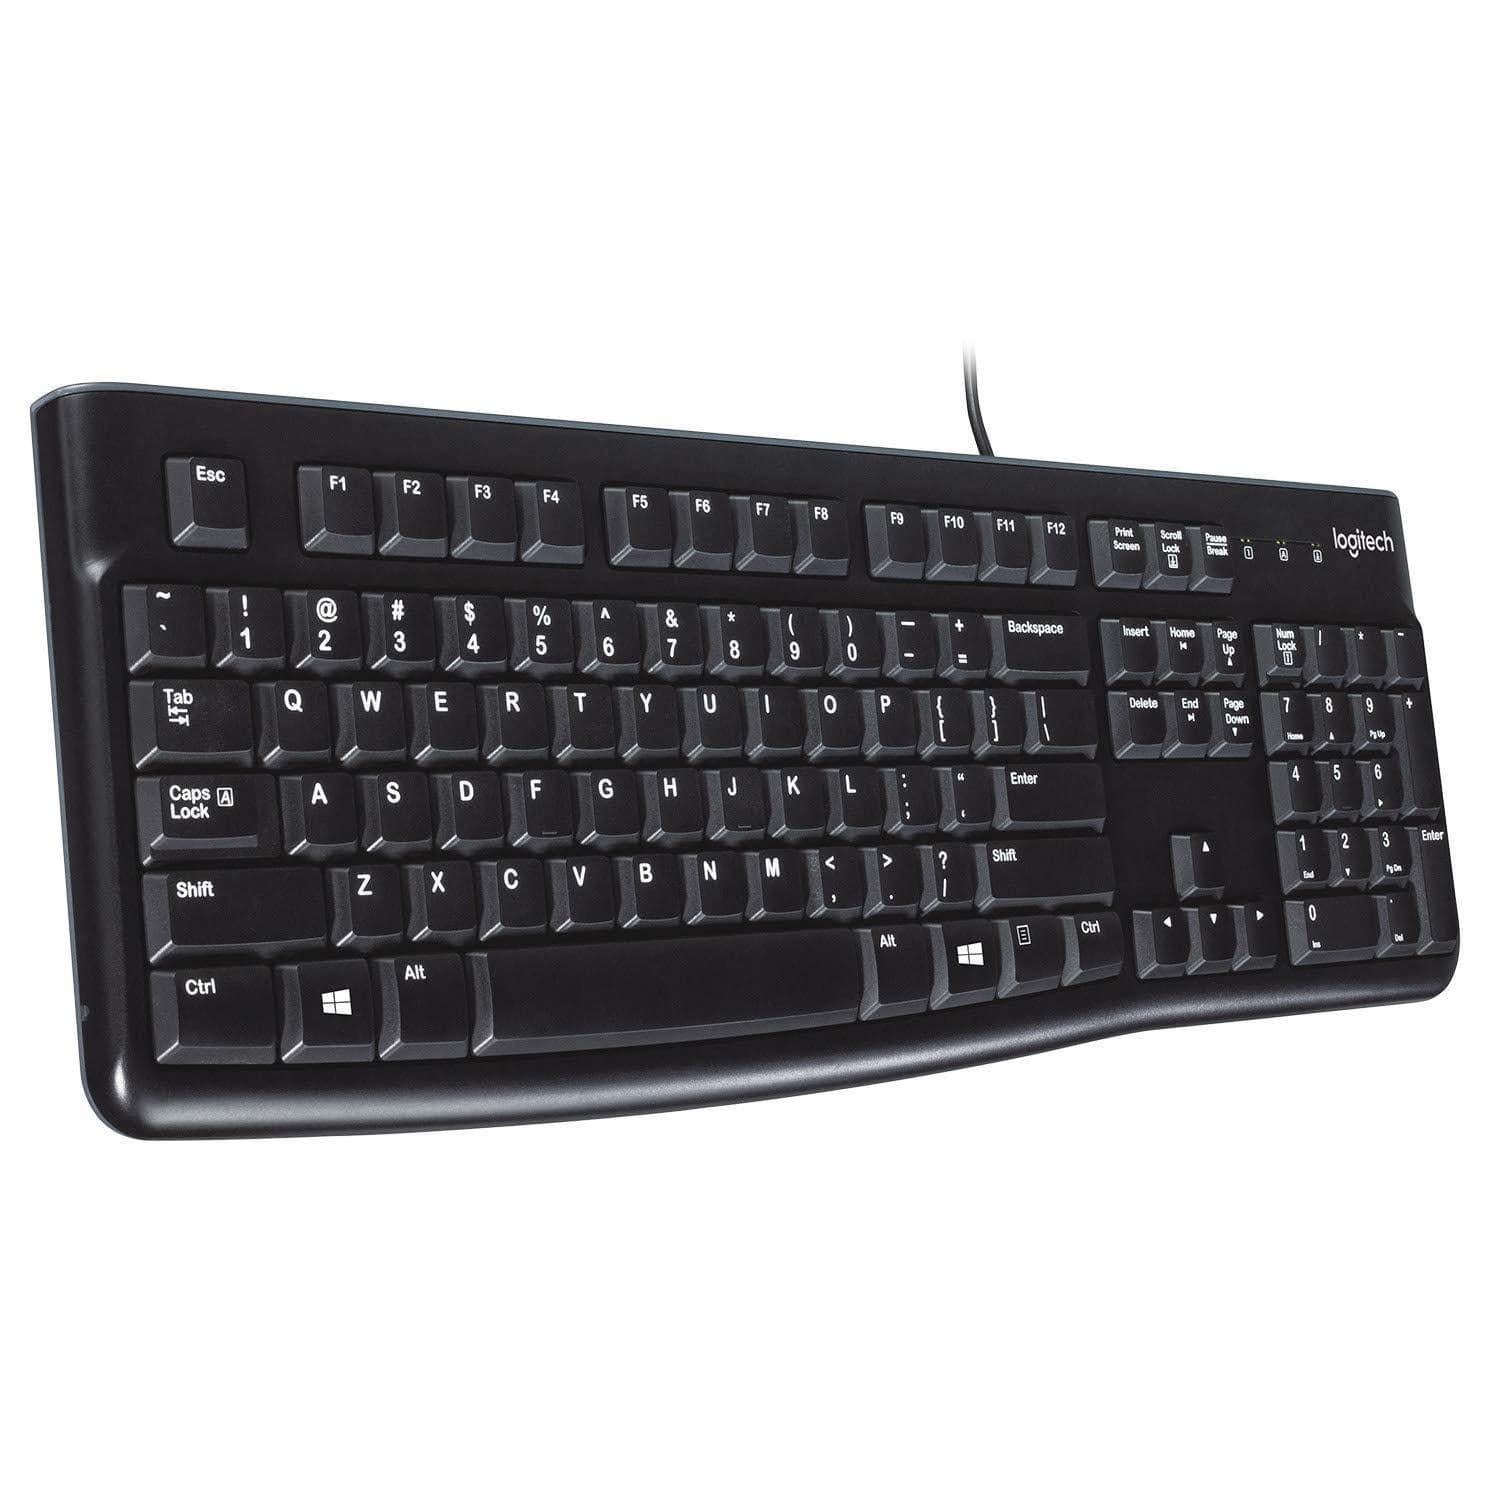 Logitech Usb Keyboard K120 Wired Plug-and-Play.-Computers and Laptops-dealsplant